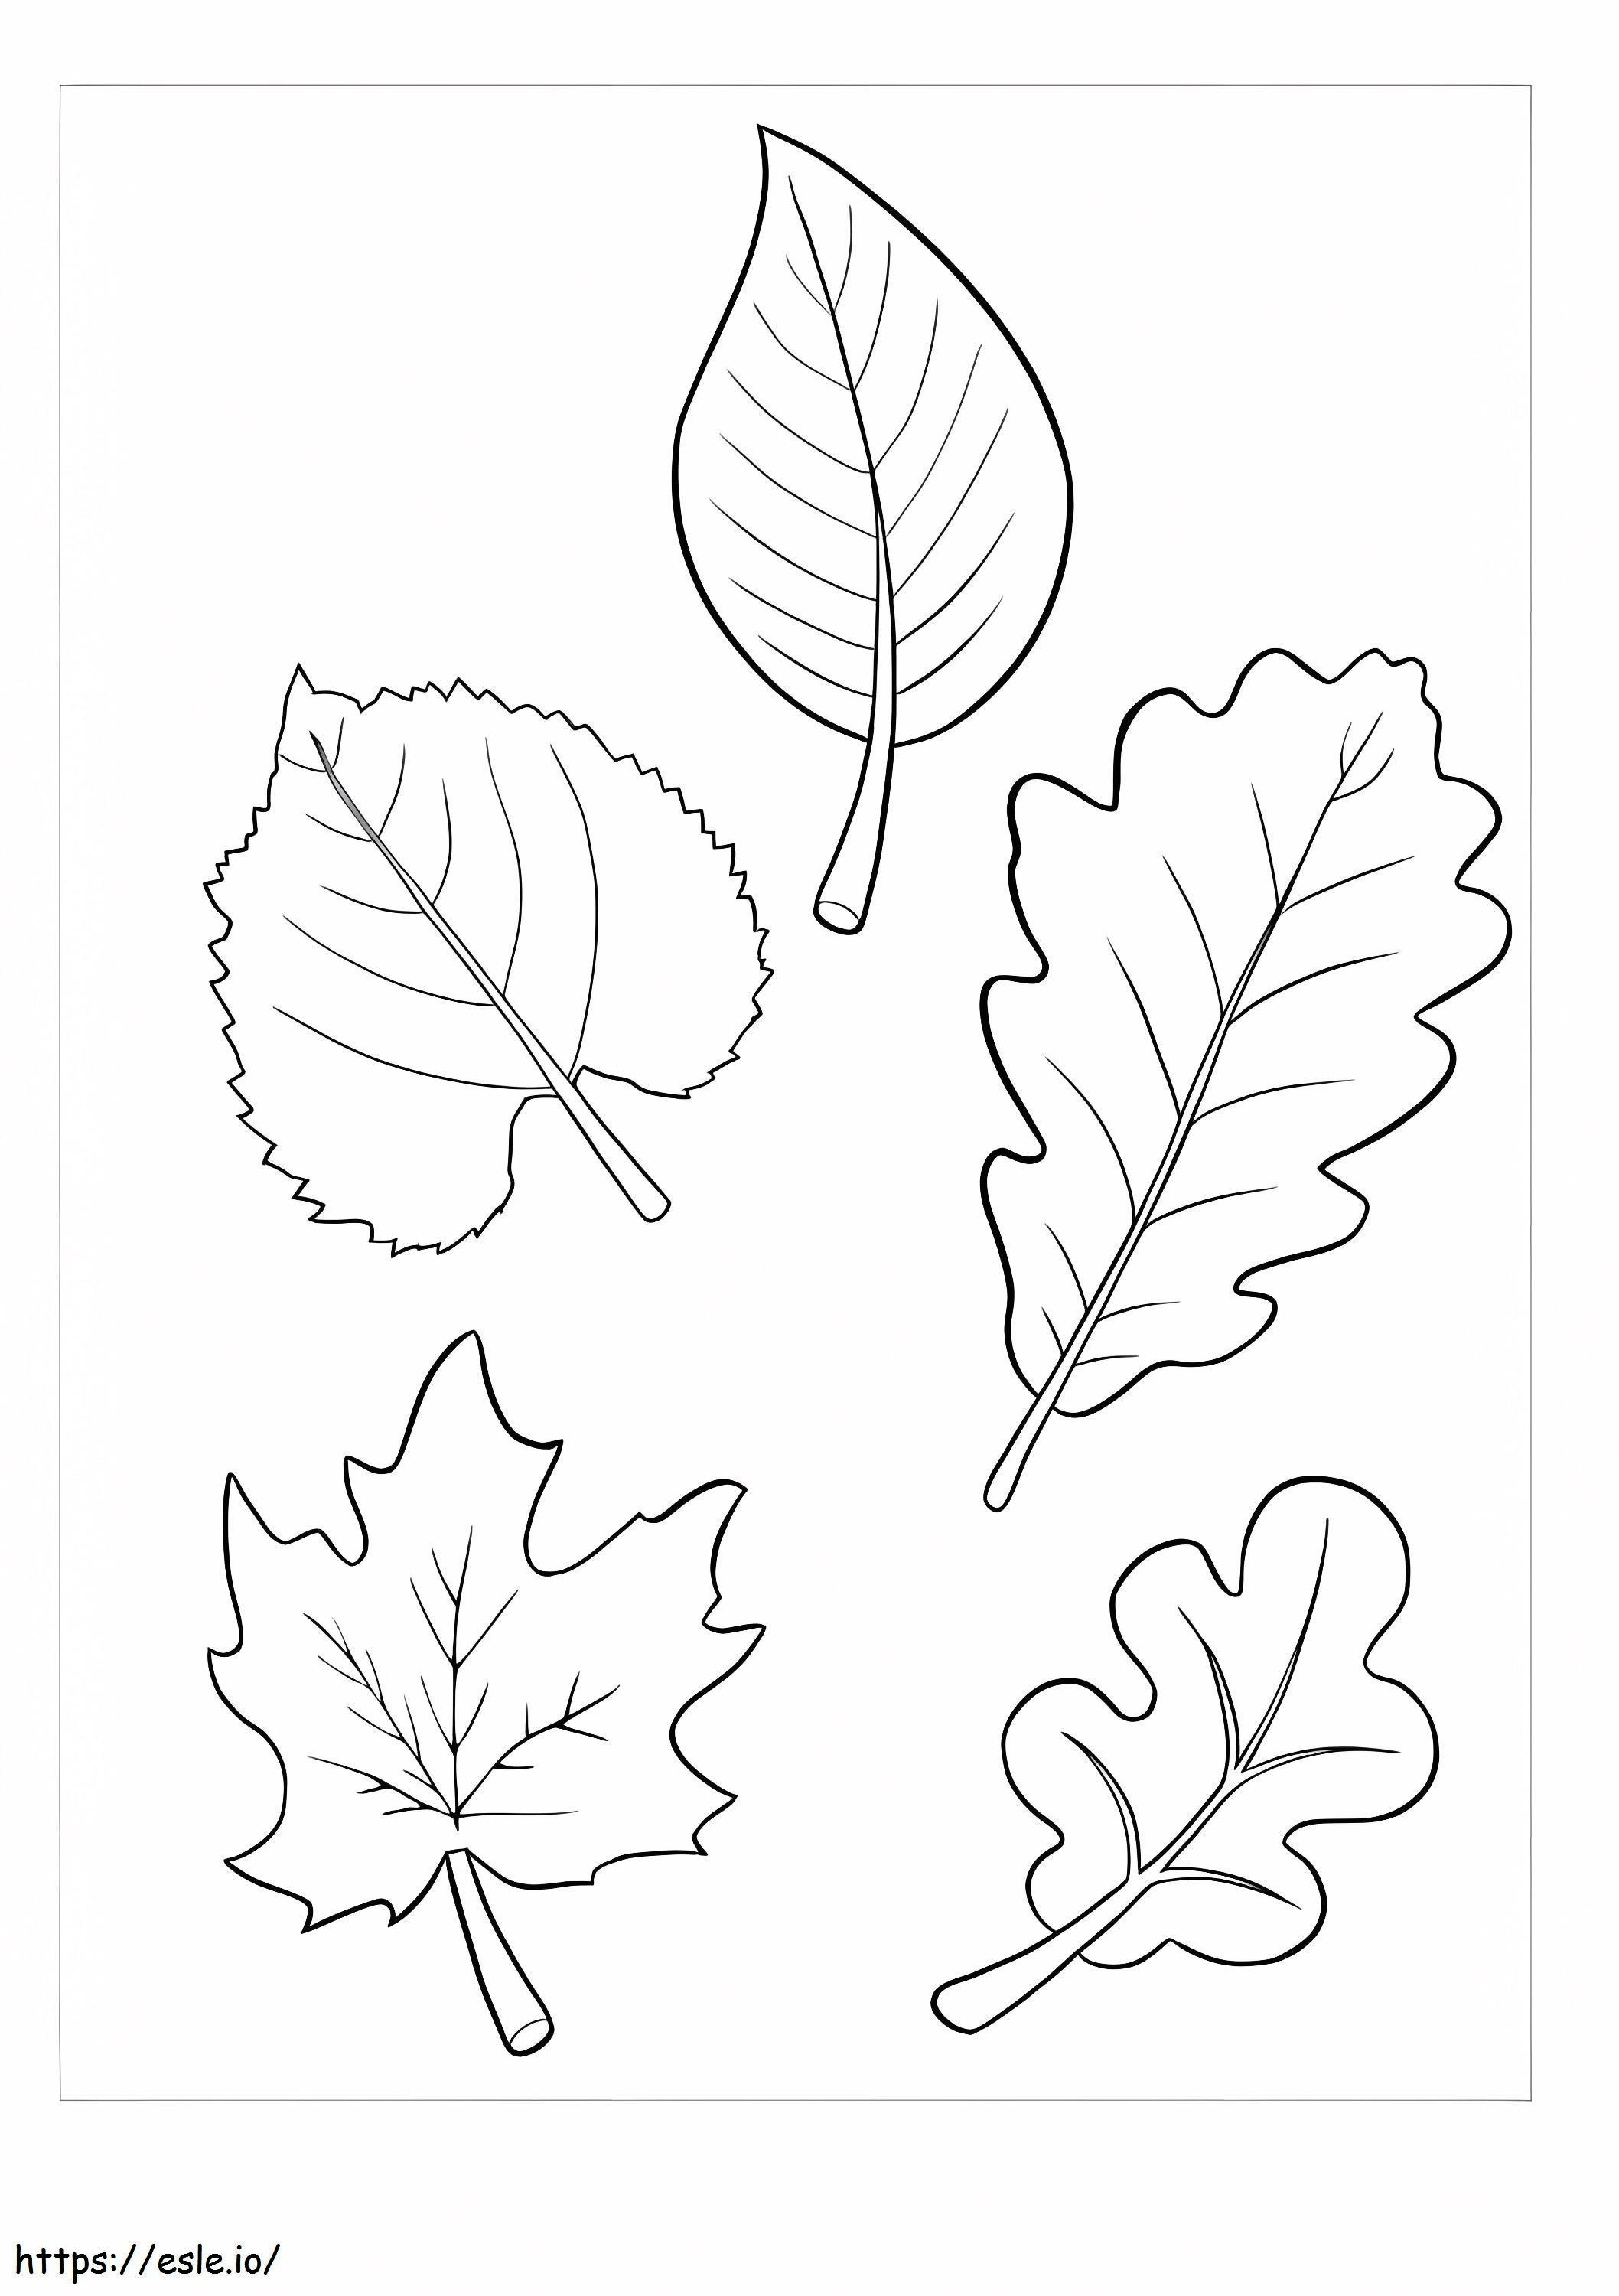 Five Leaves coloring page